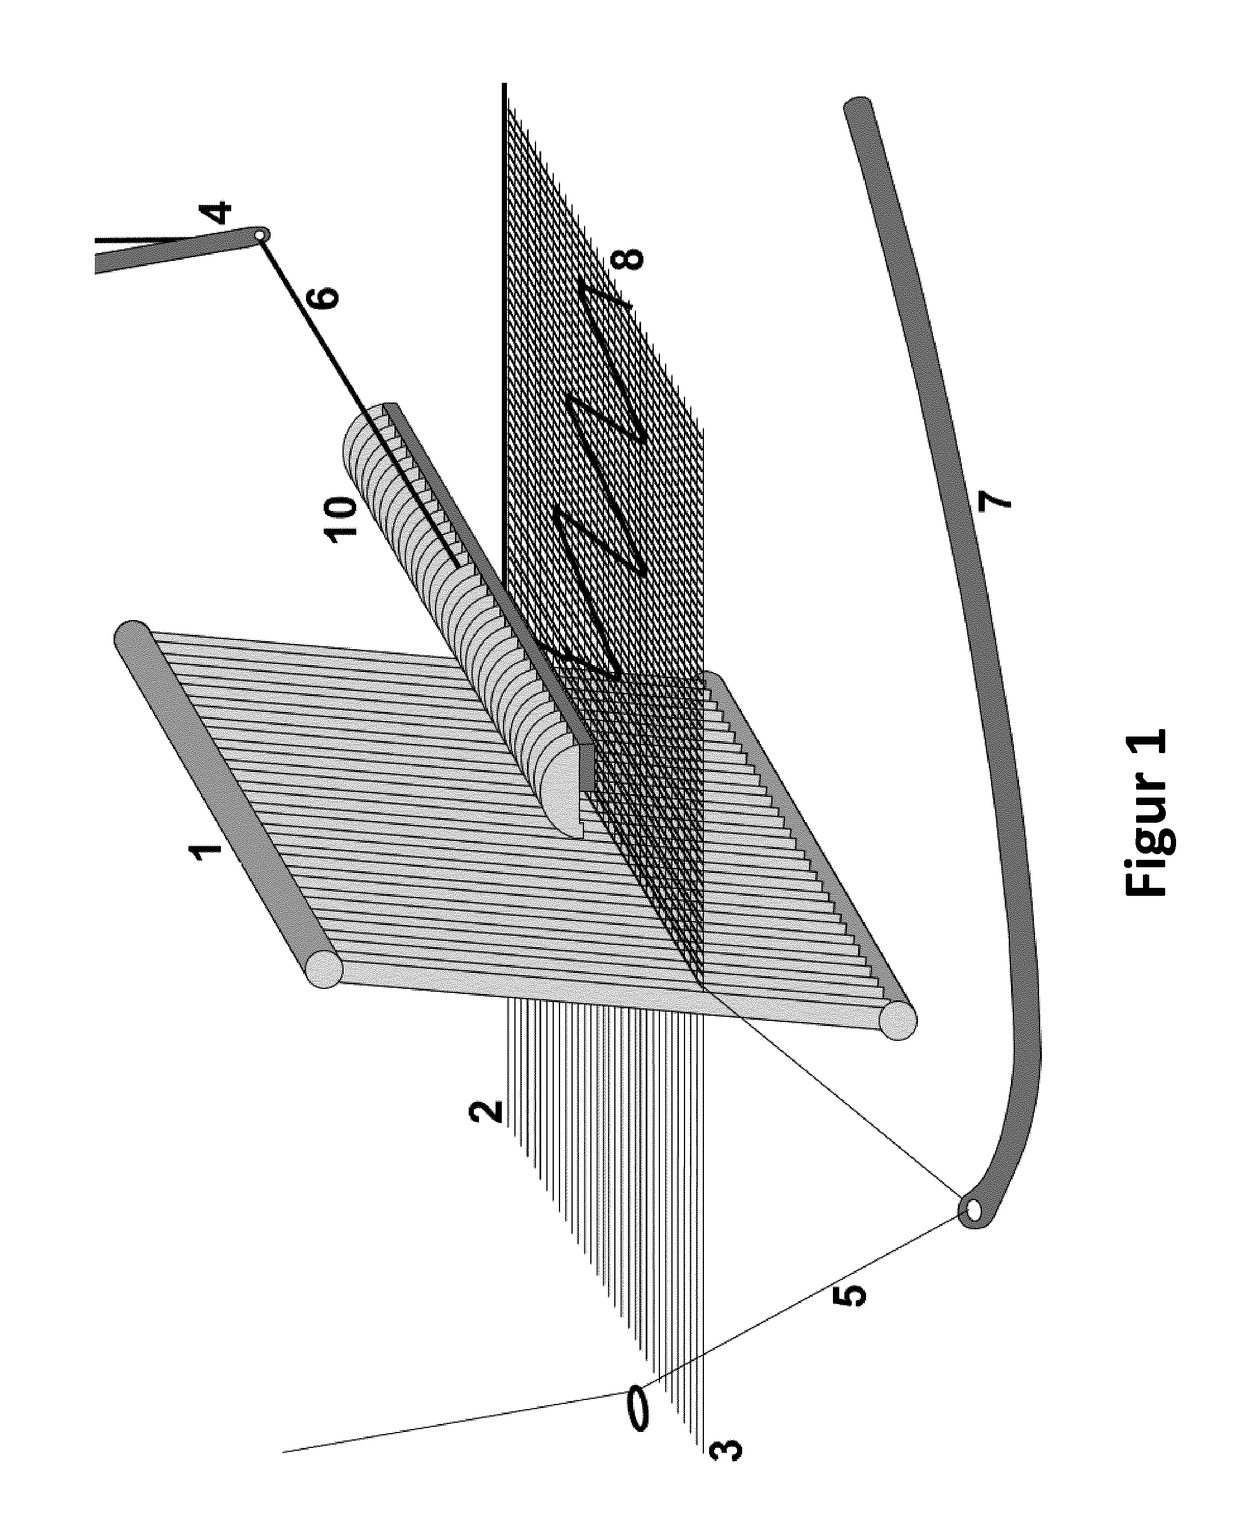 Loom for Producing Woven Material, Having Incorporated Knitting Threads or Cover Threads